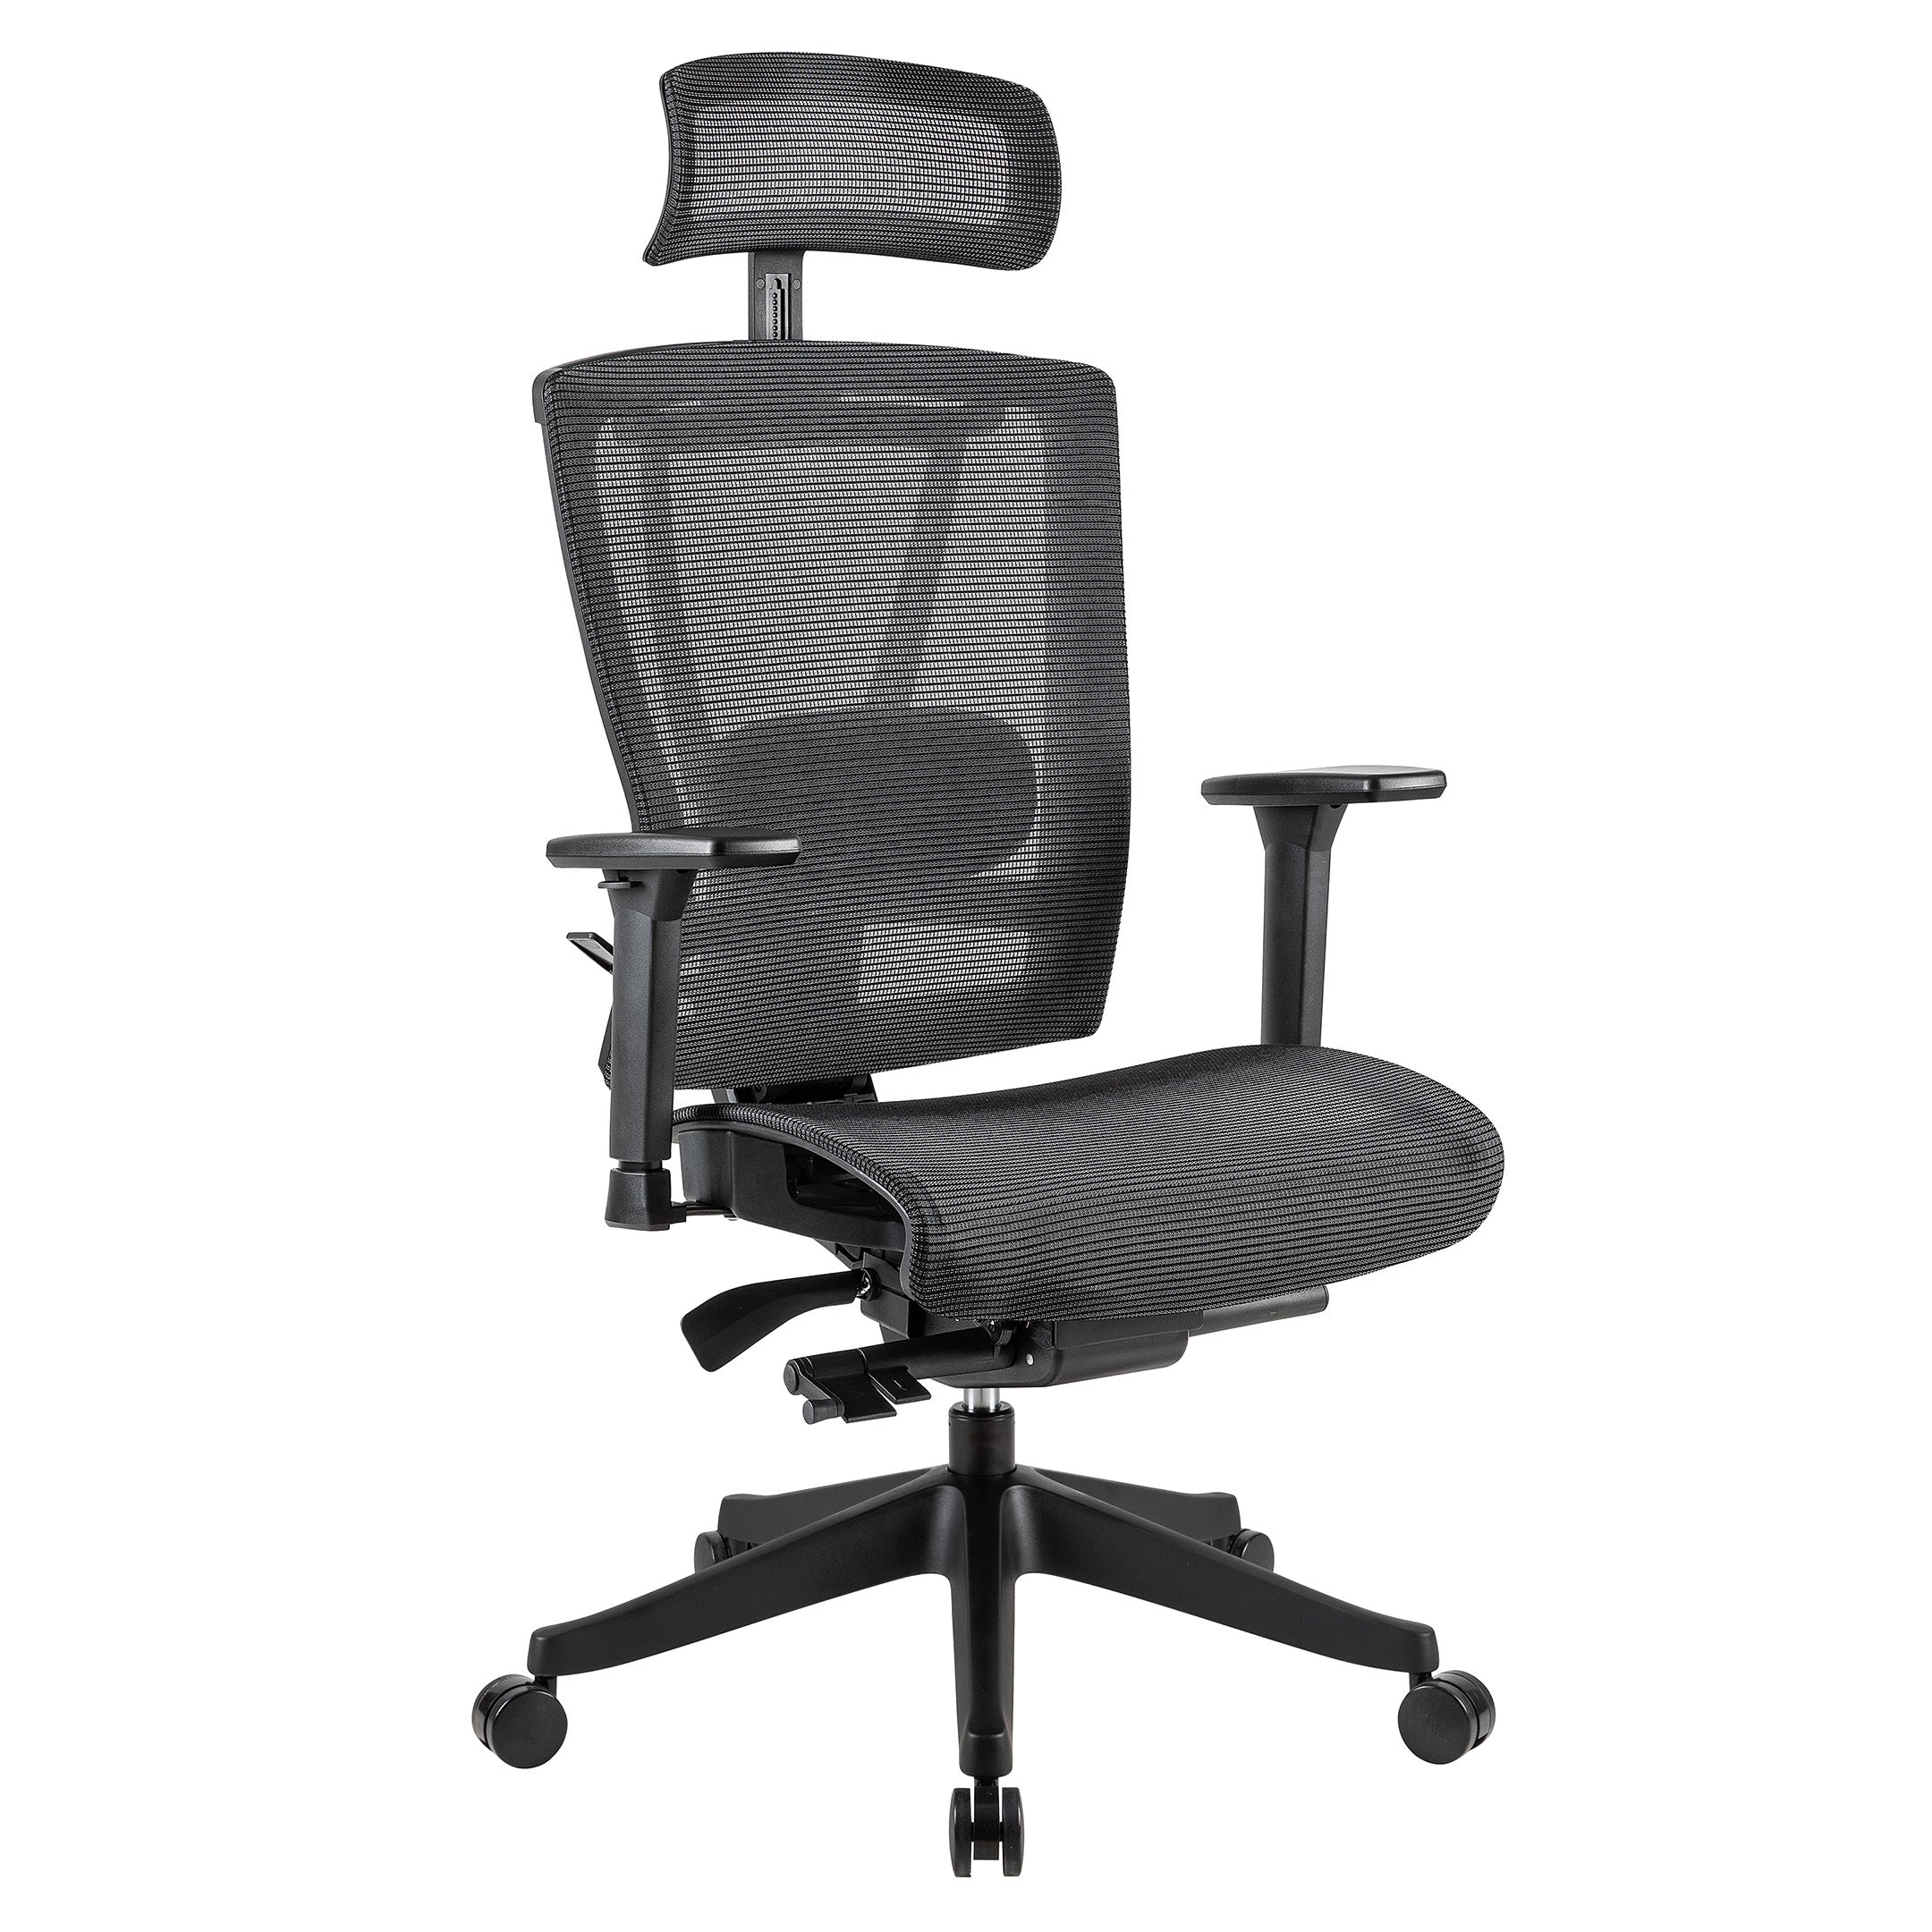 9Space Ergonomic Office Chair Pro - Improve Your Works